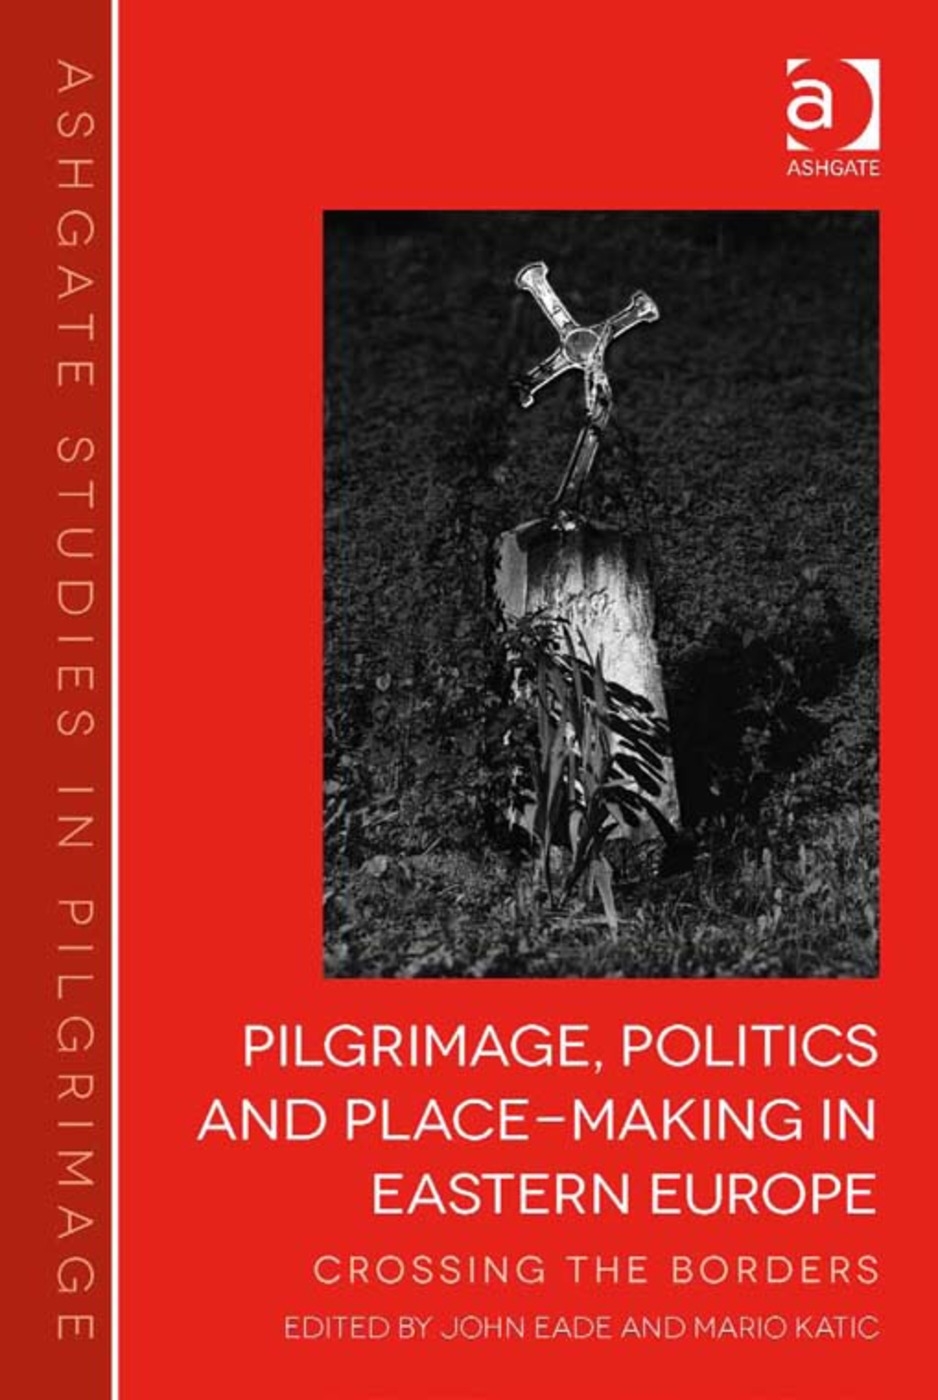 Pilgrimage, Politics and Place-Making in Eastern Europe: Crossing the Borders. Edited by John Eade and Mario Katic